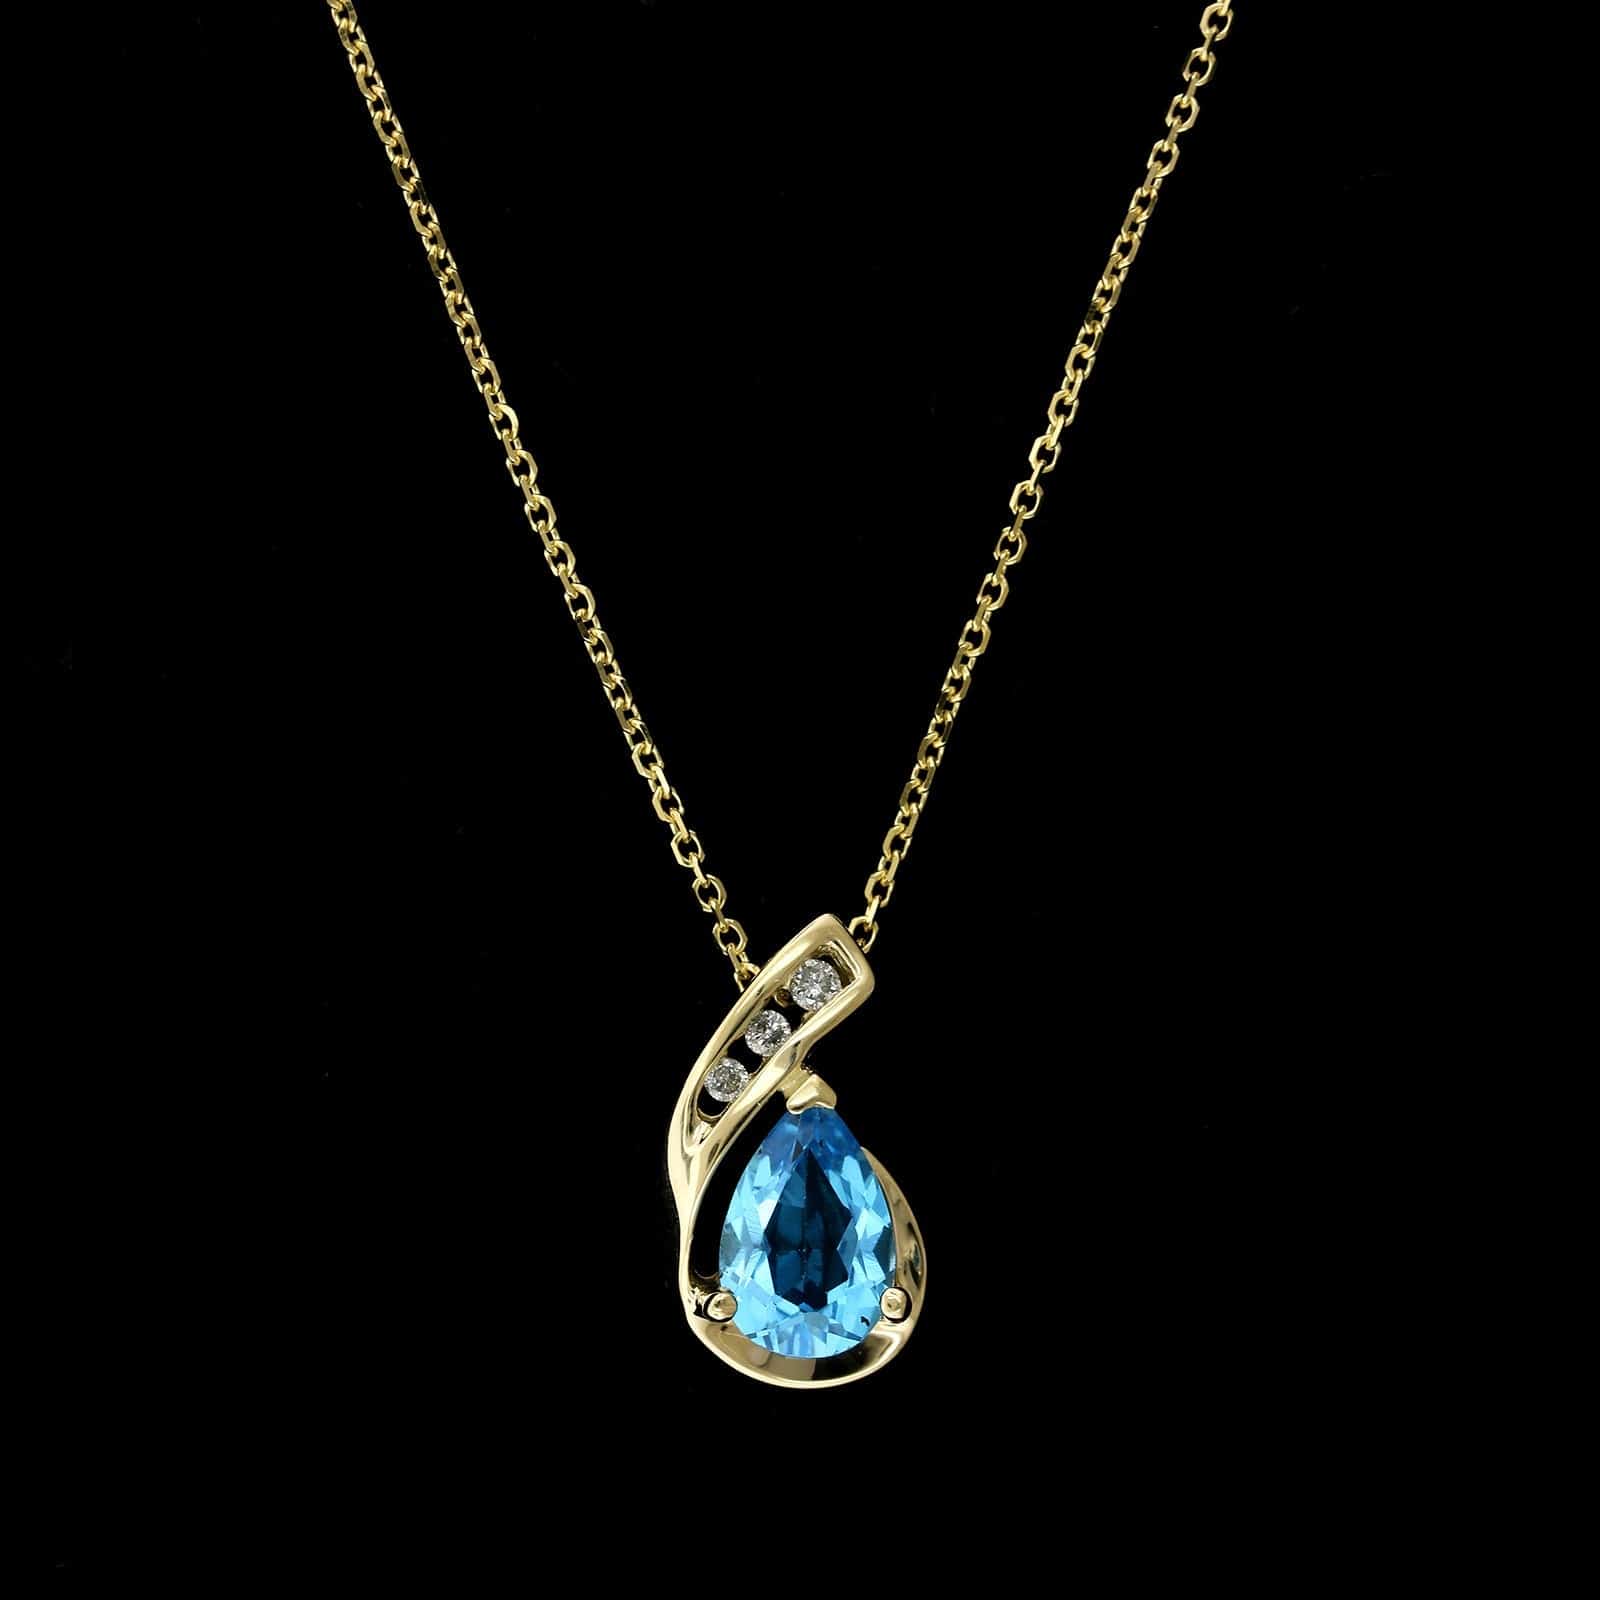 14K Yellow Gold Estate Blue Topaz and Diamond Pendant Necklace, Long's Jewelers